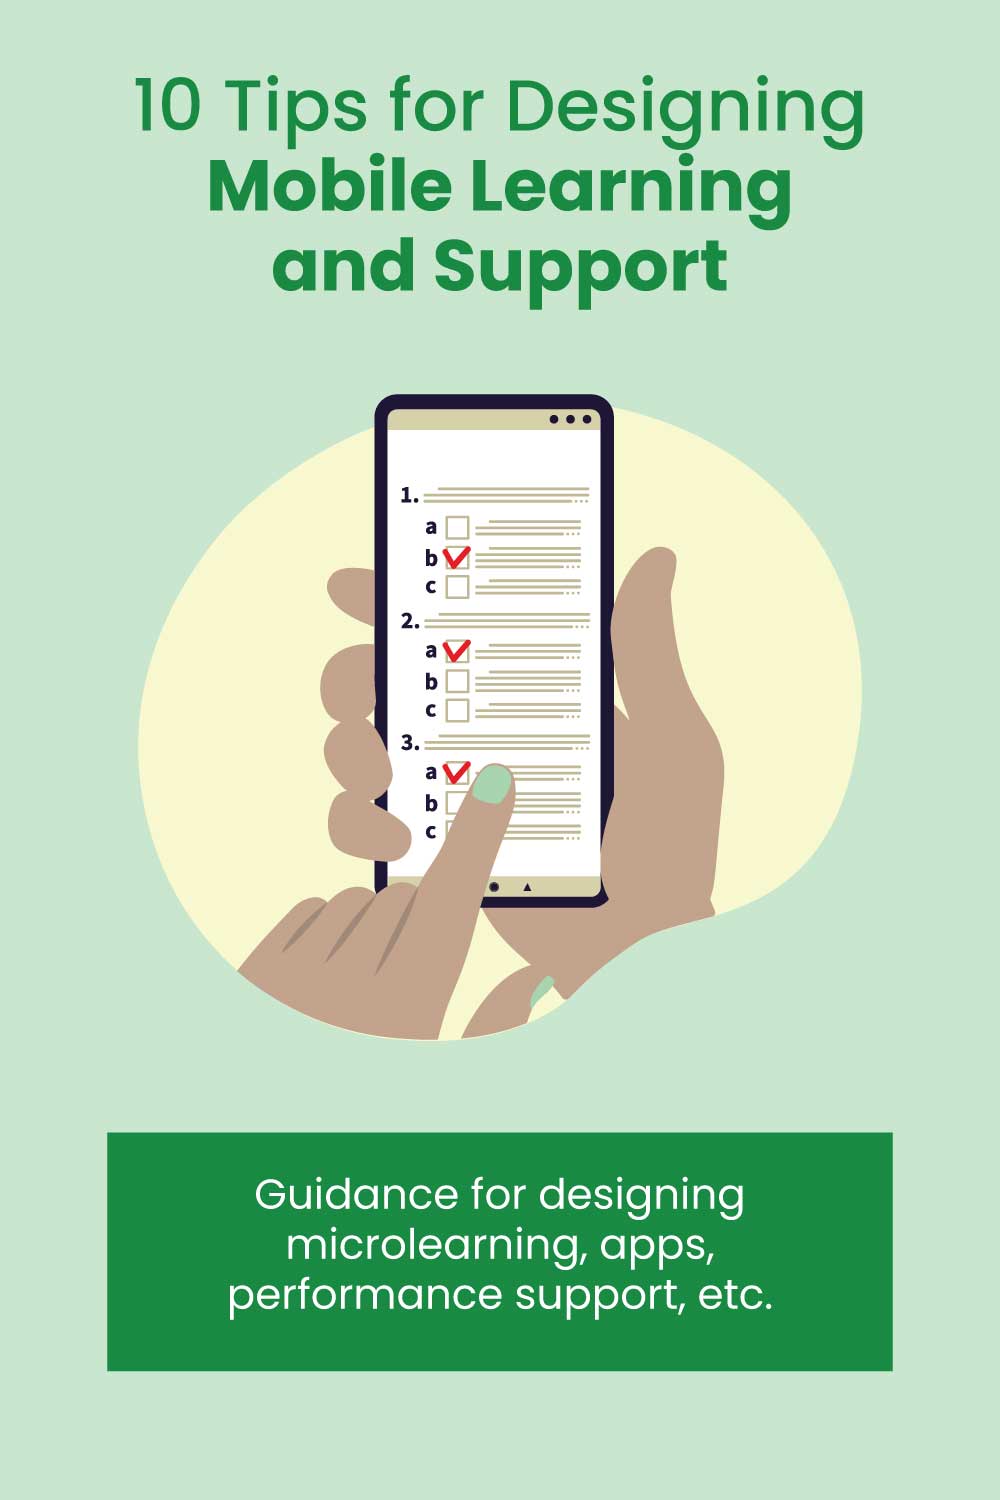 10 Tips For Designing Mobile Learning and Support